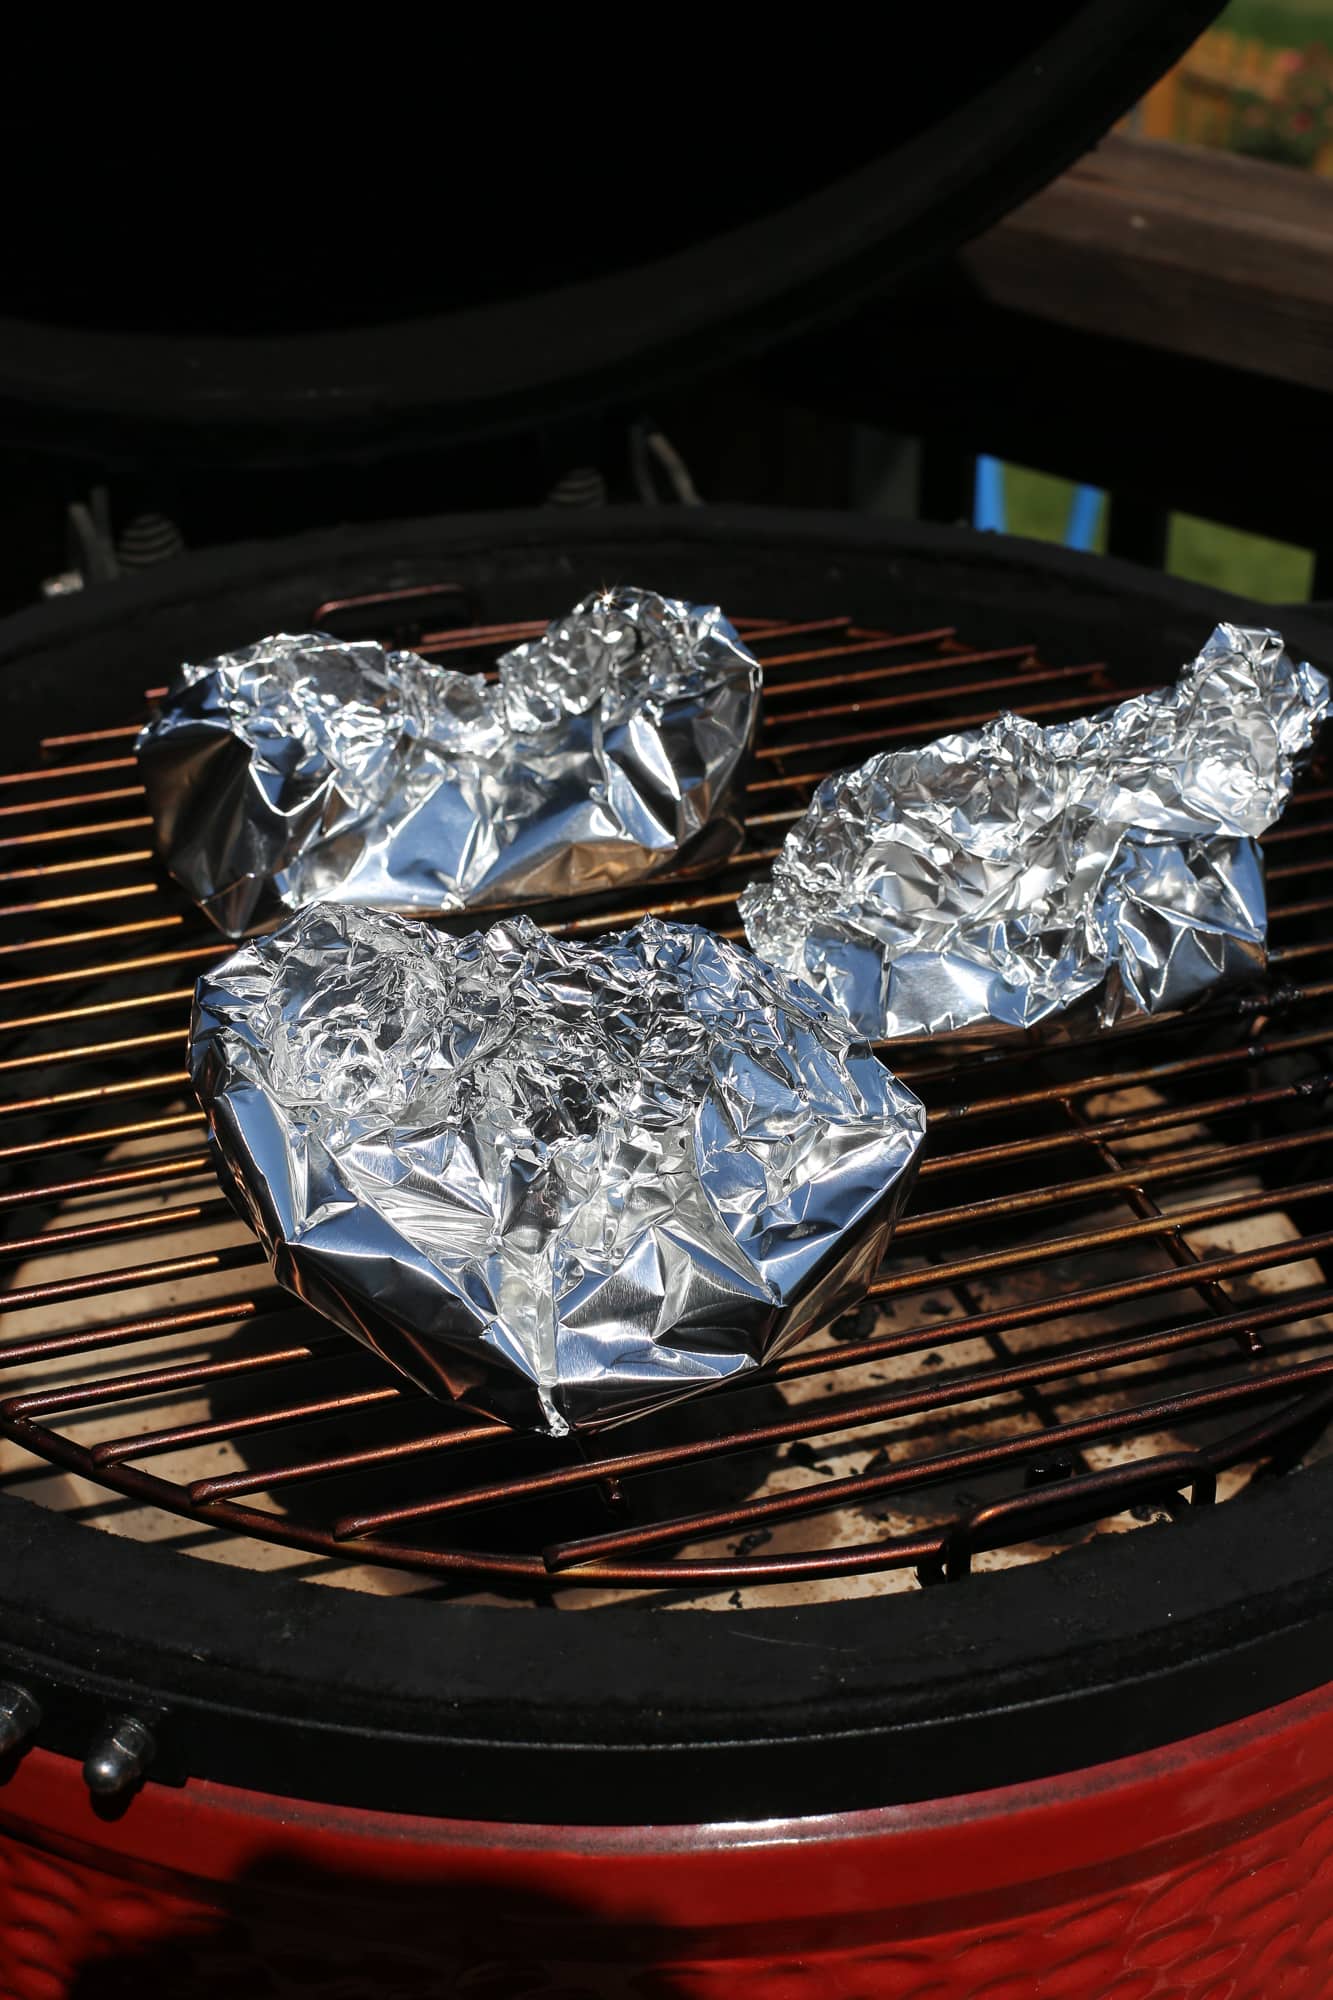 Foil packs of vegetables on the grill 